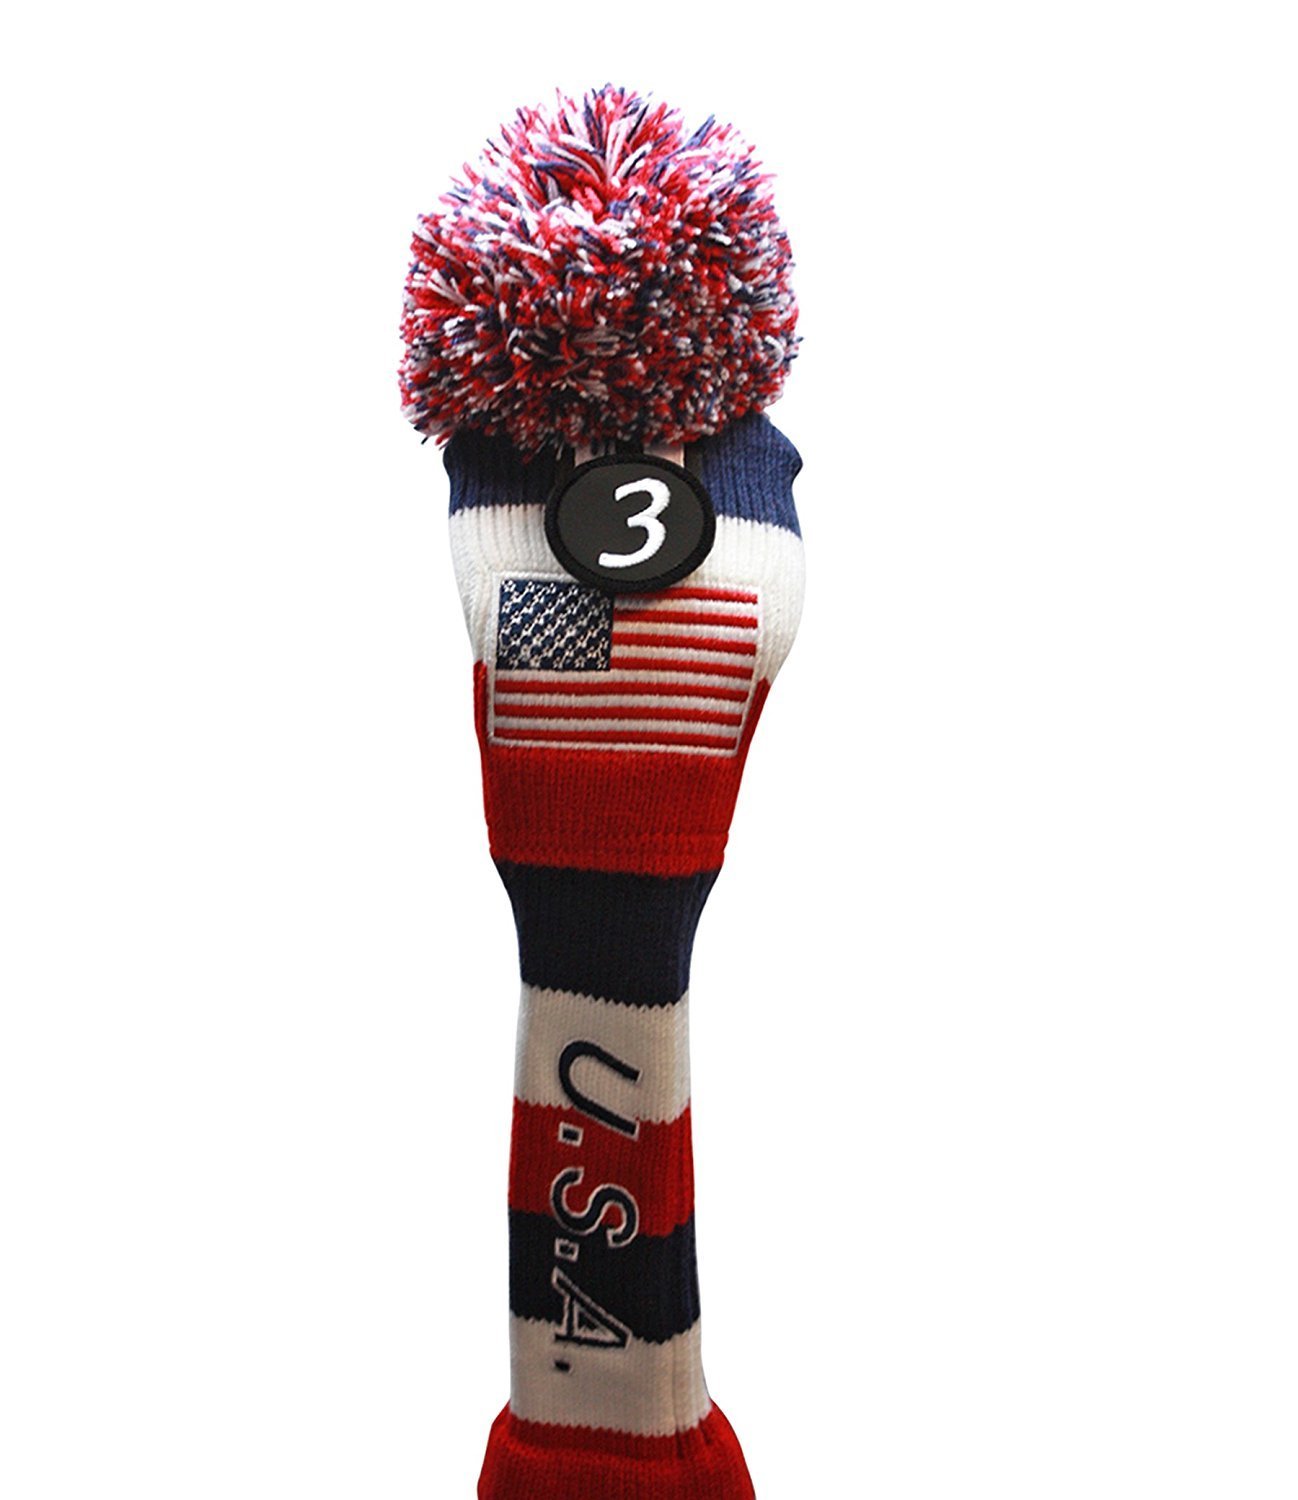 USA Majek Golf Driver 1 3 5 7 Fairway Woods Headcovers Pom Pom Knit Limited Edition Vintage Classic Traditional Flag Stars Red White Blue Stripes Retro Head Cover Fits 460cc Drivers and 260cc Woods - image 3 of 8